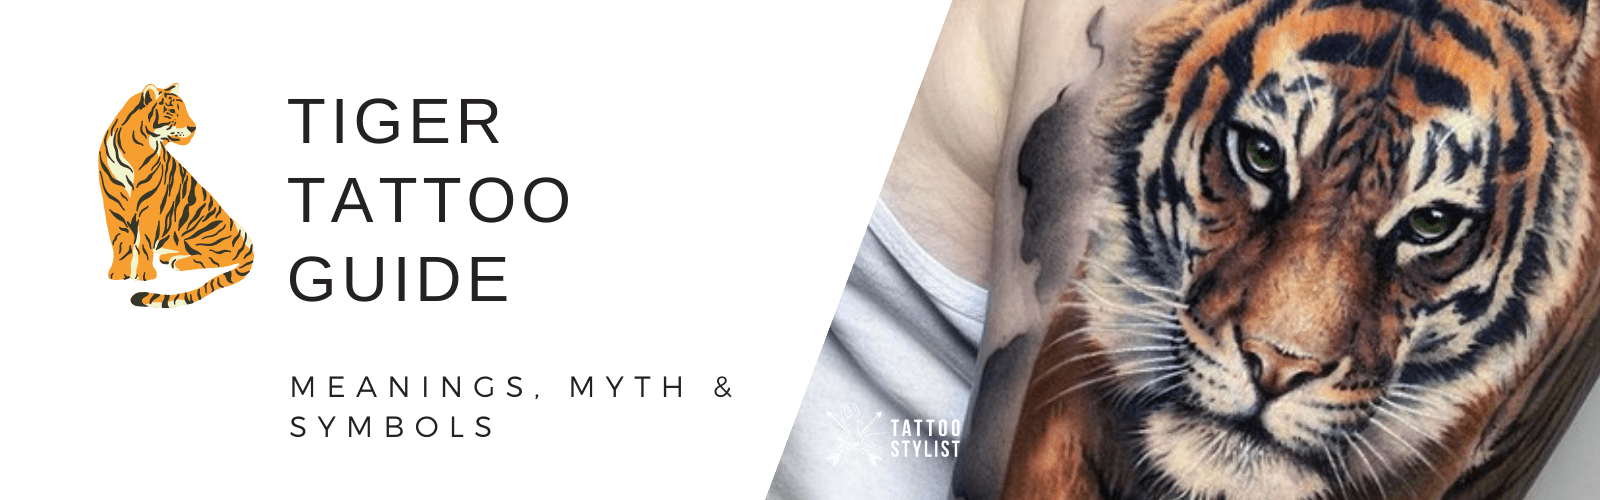 tiger tattoo designs meaning myth featured image